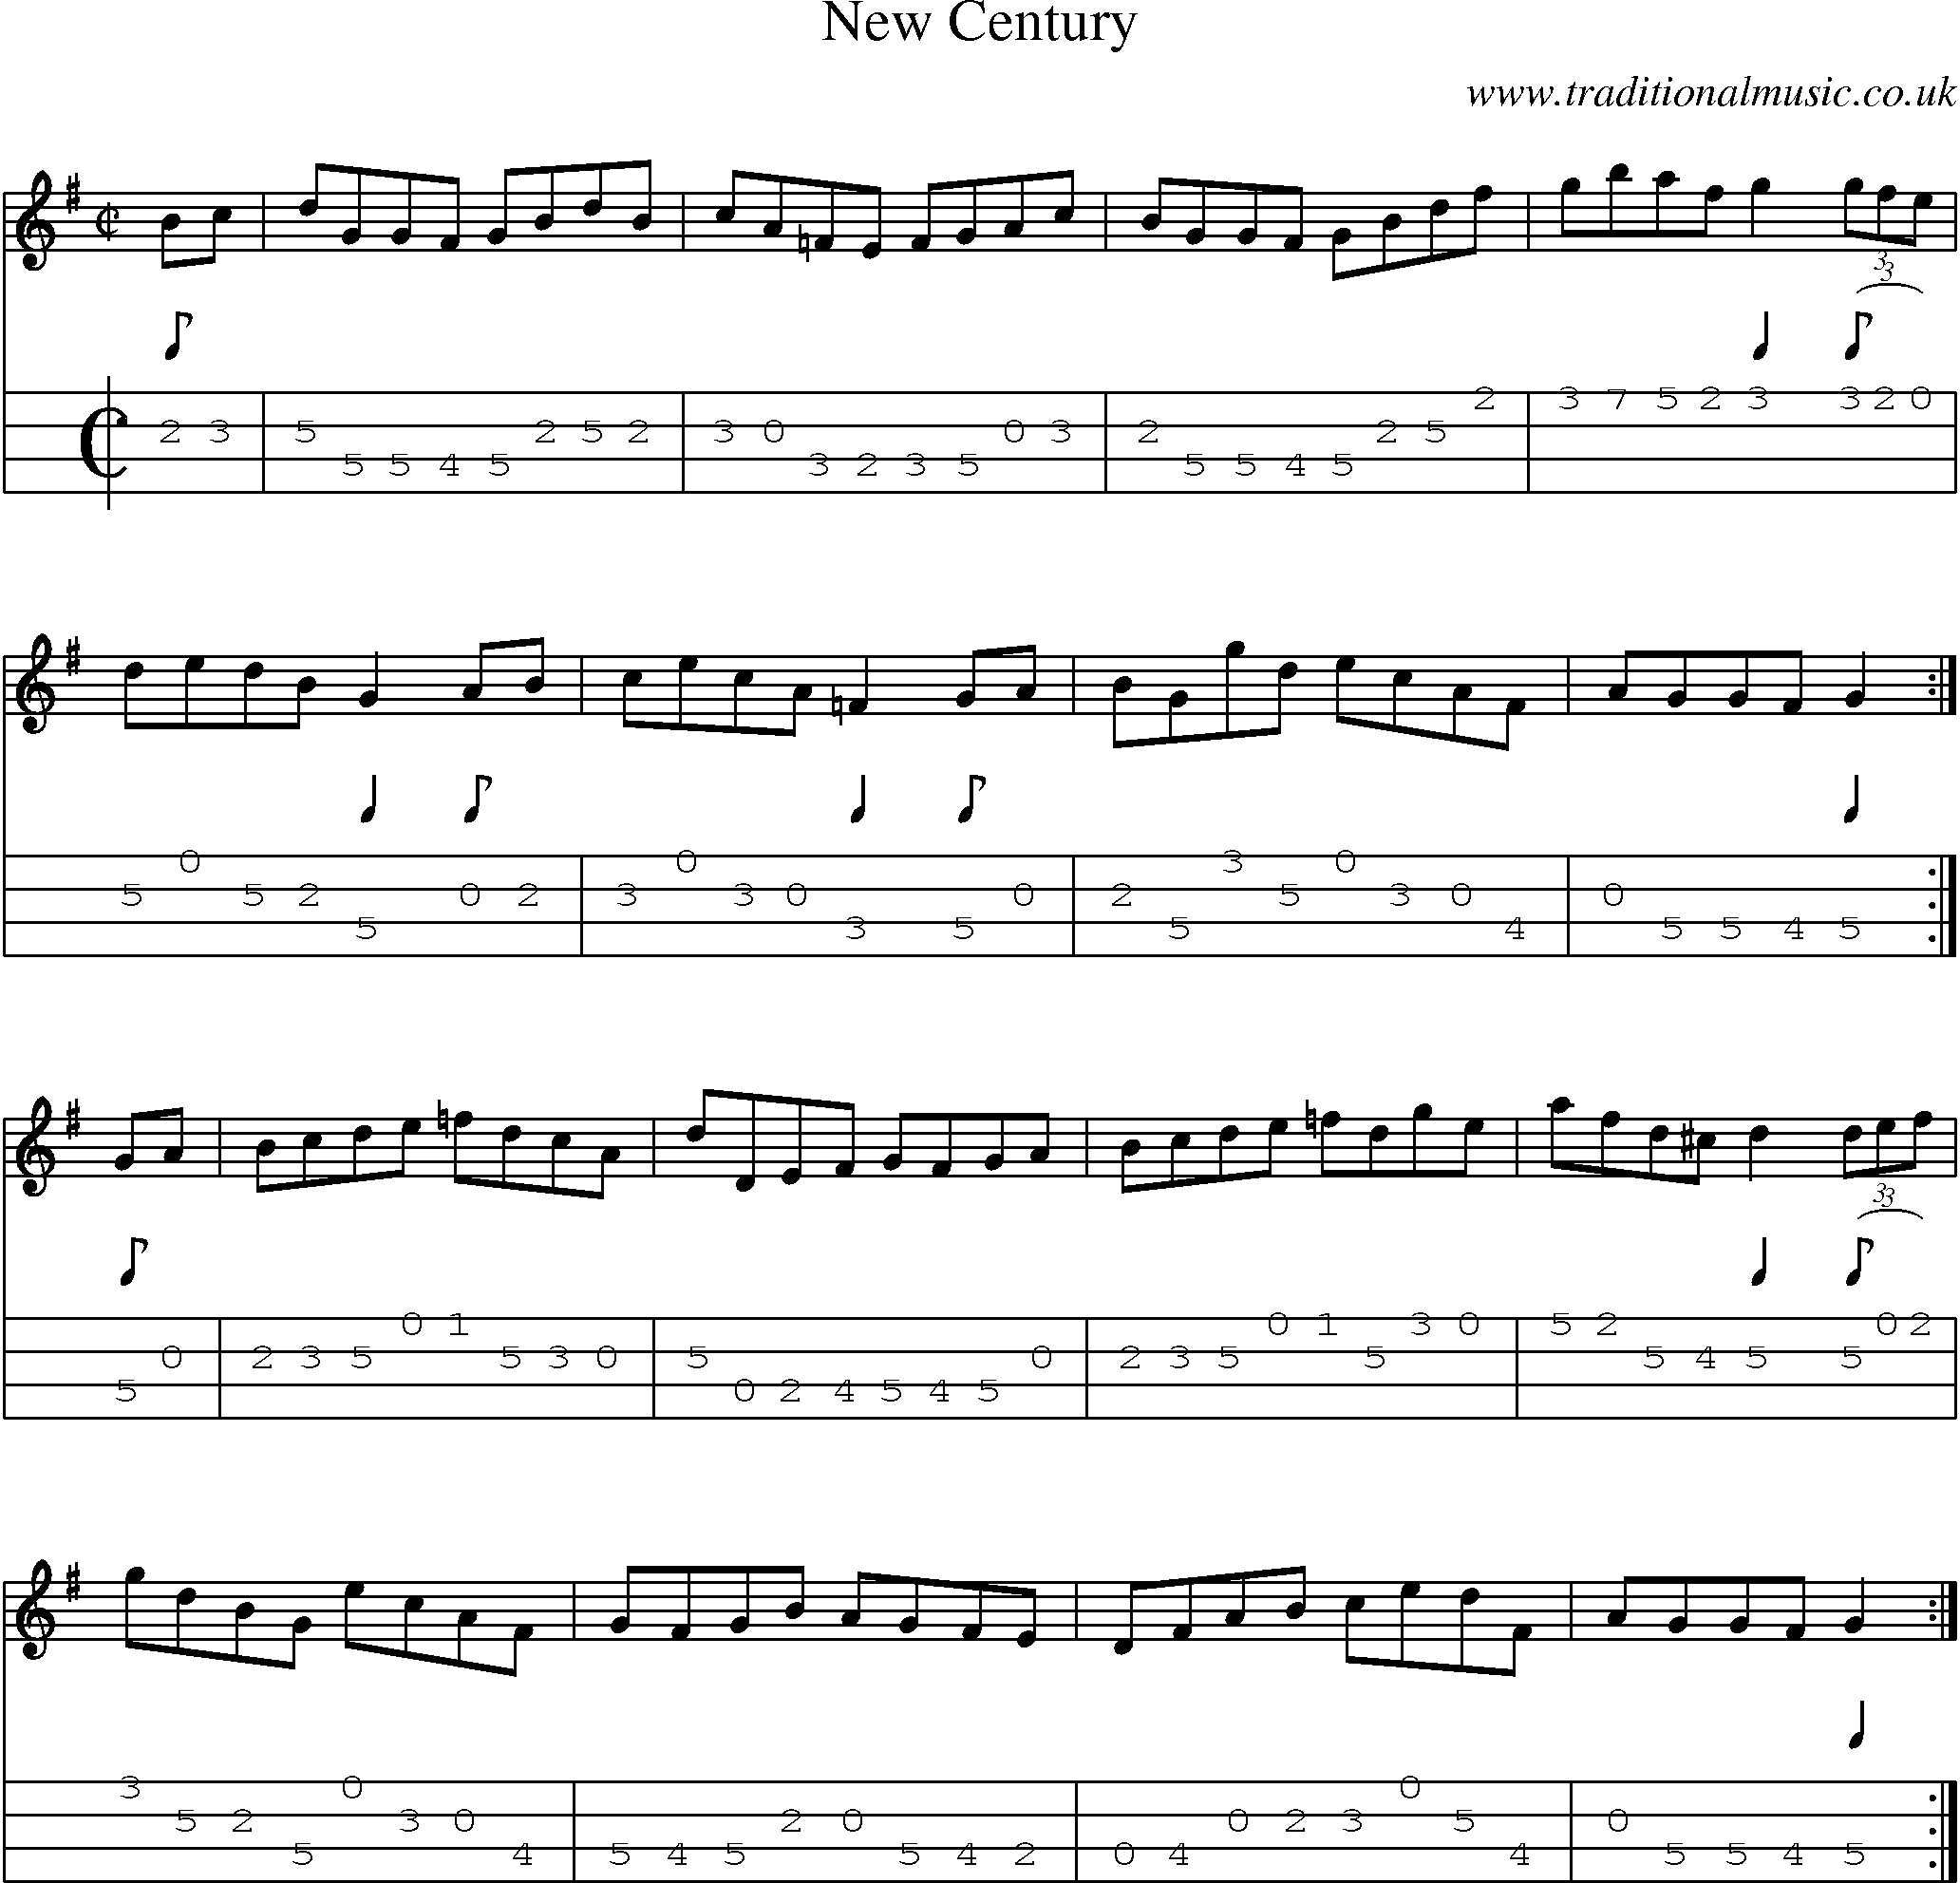 Music Score and Mandolin Tabs for New Century